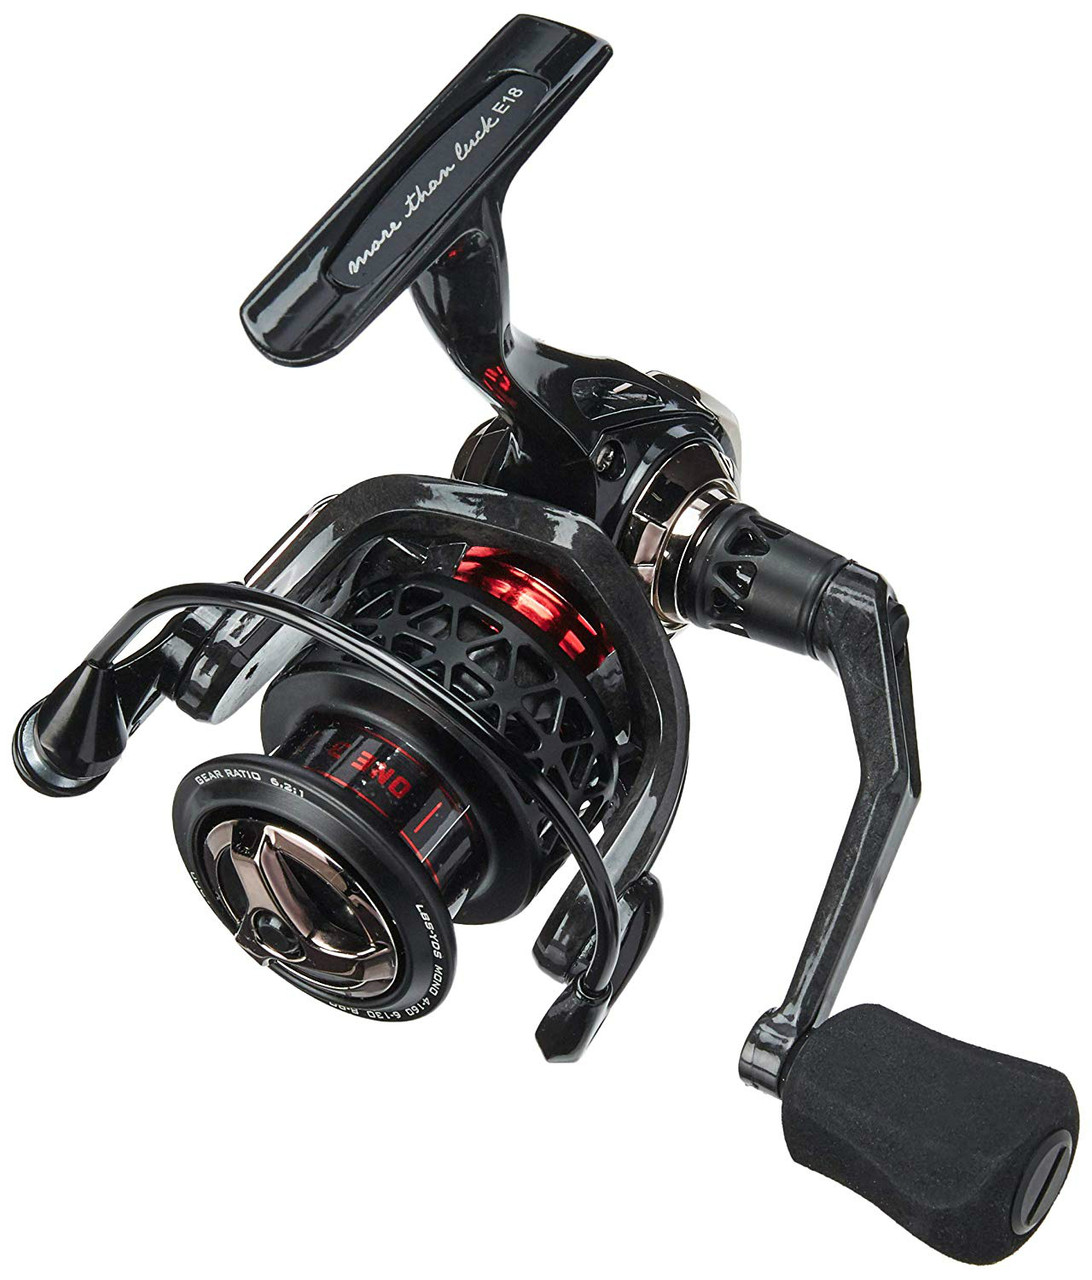 https://cdn10.bigcommerce.com/s-hudw0p8/products/38926/images/7562/crtg-1000-2000-30000-4000-13-fishing-creed-gt-spinning-reel-all-1__22830.1560688613.1280.1280.jpg?c=2